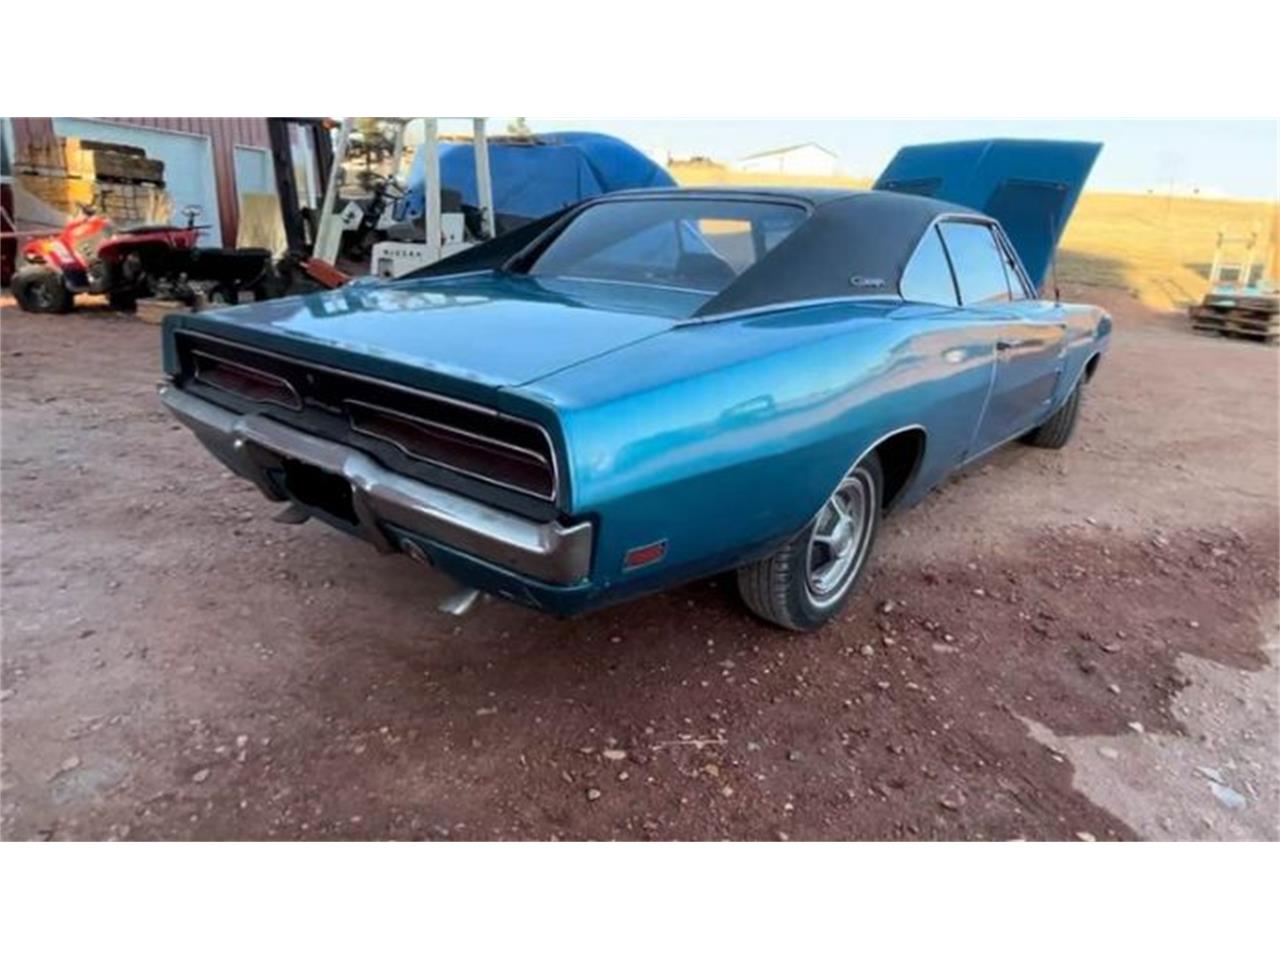 For Sale: 1969 Dodge Charger in Cadillac, Michigan for sale in Cadillac, MI